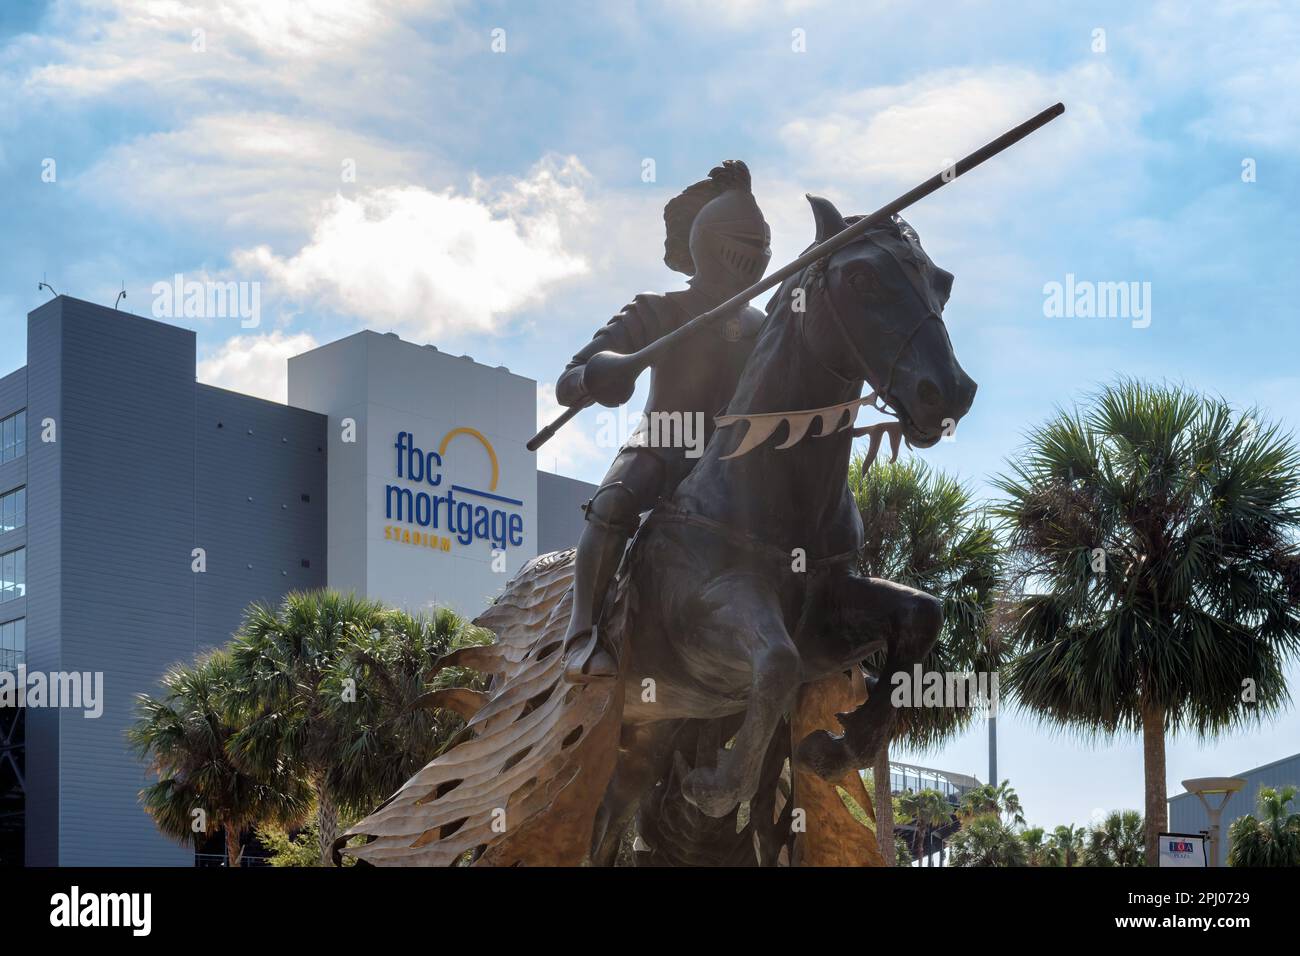 Knight on the horse statue in the University of Central Florida Stock Photo